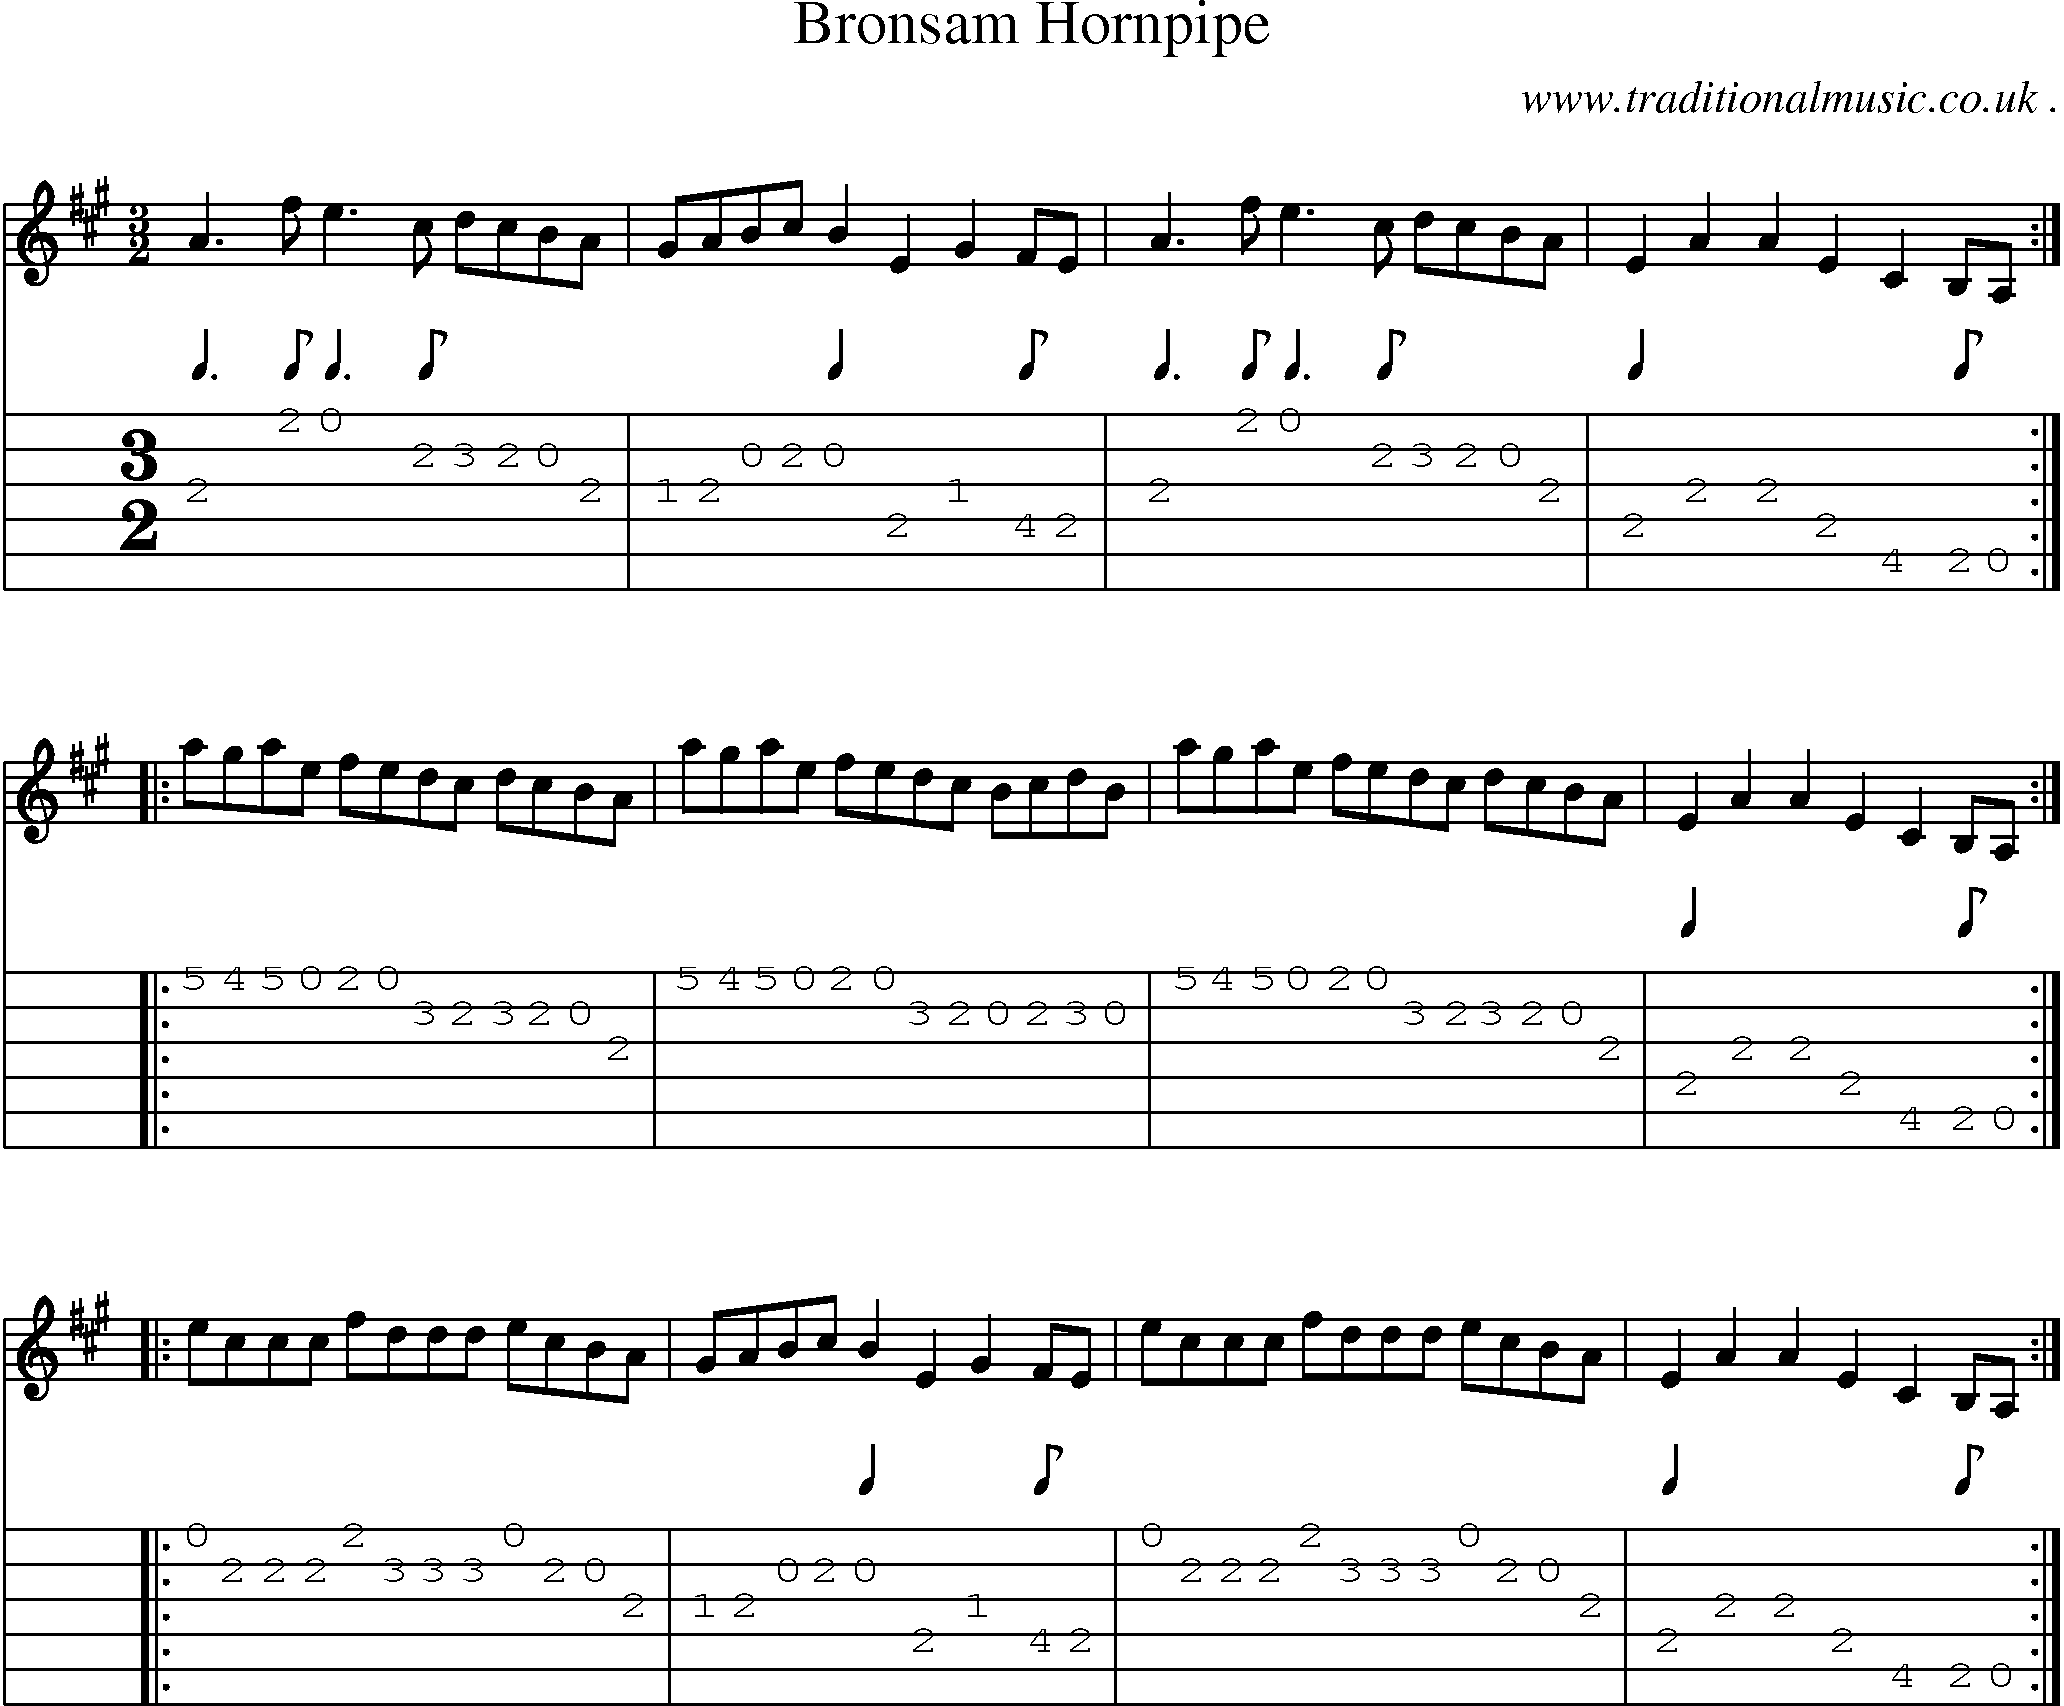 Sheet-Music and Guitar Tabs for Bronsam Hornpipe